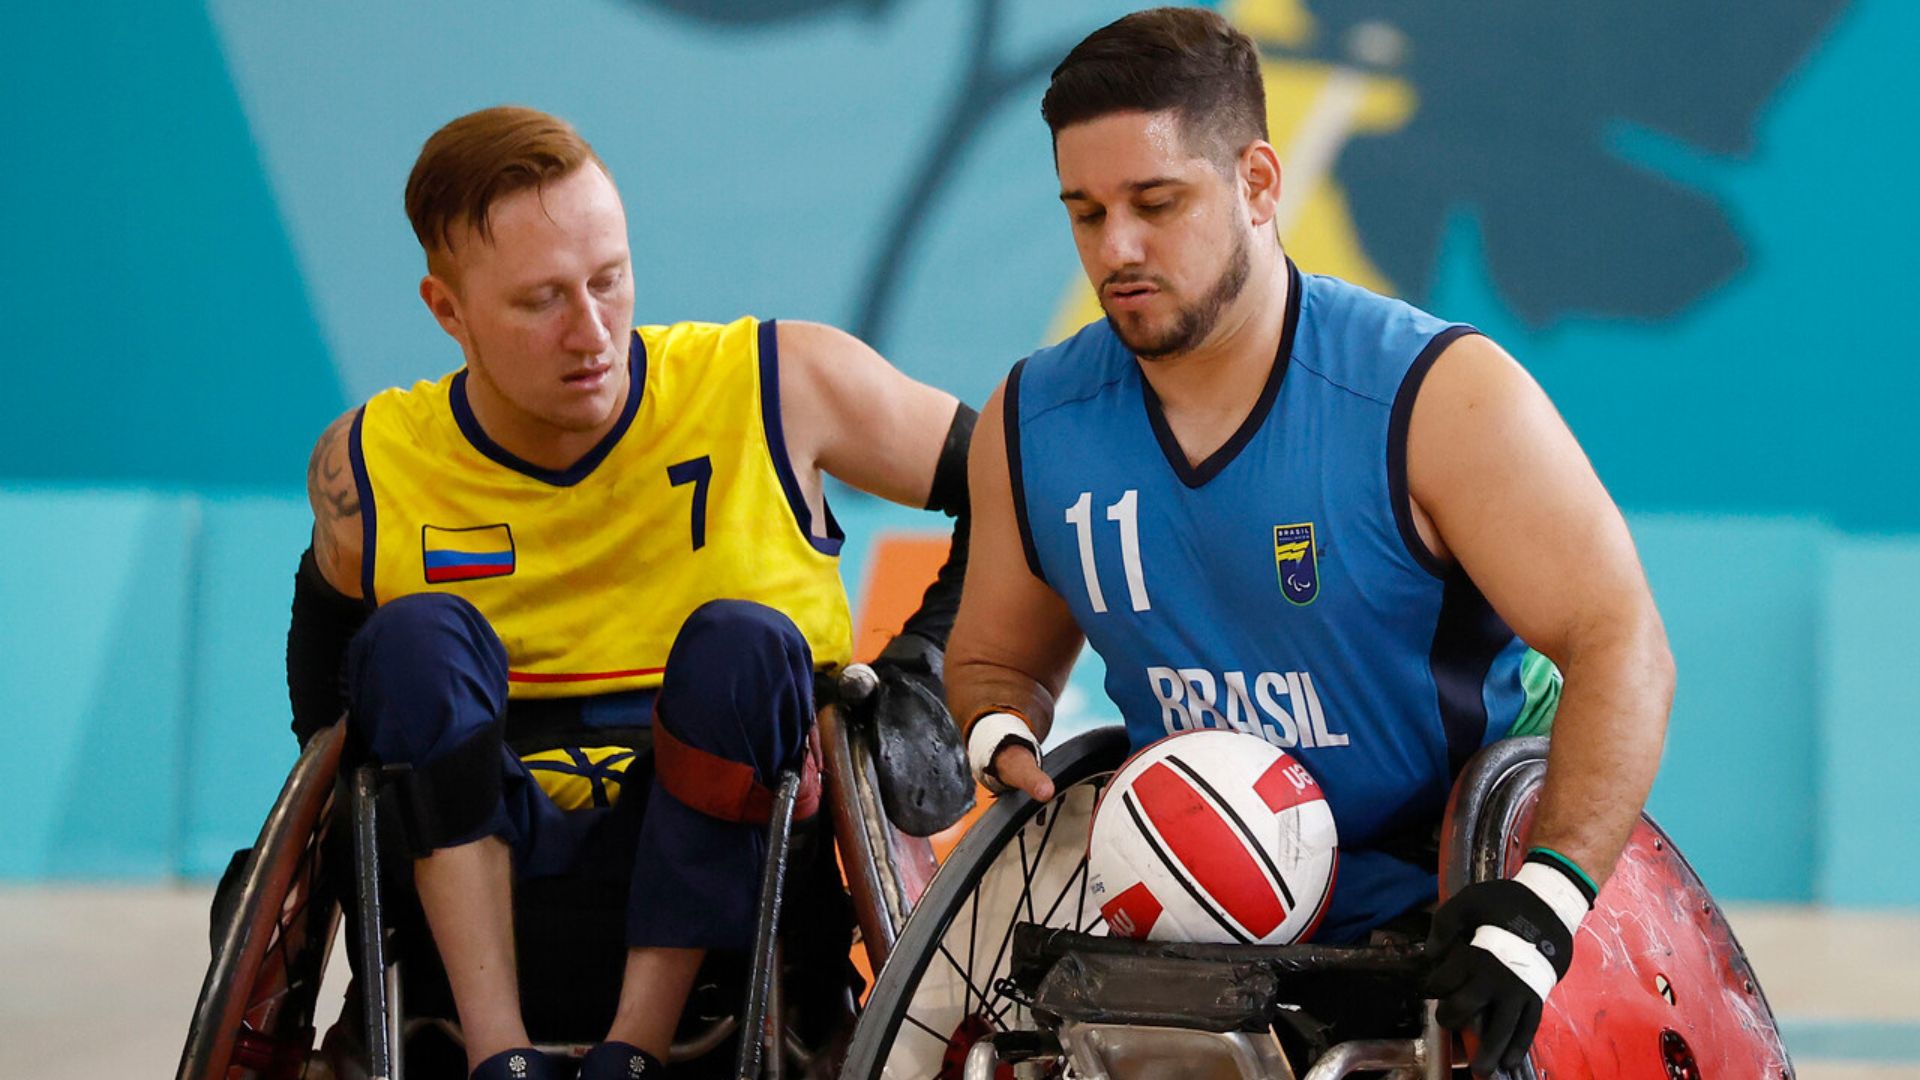 Wheelchair Rugby: Brazil Snatches Bronze from Colombia